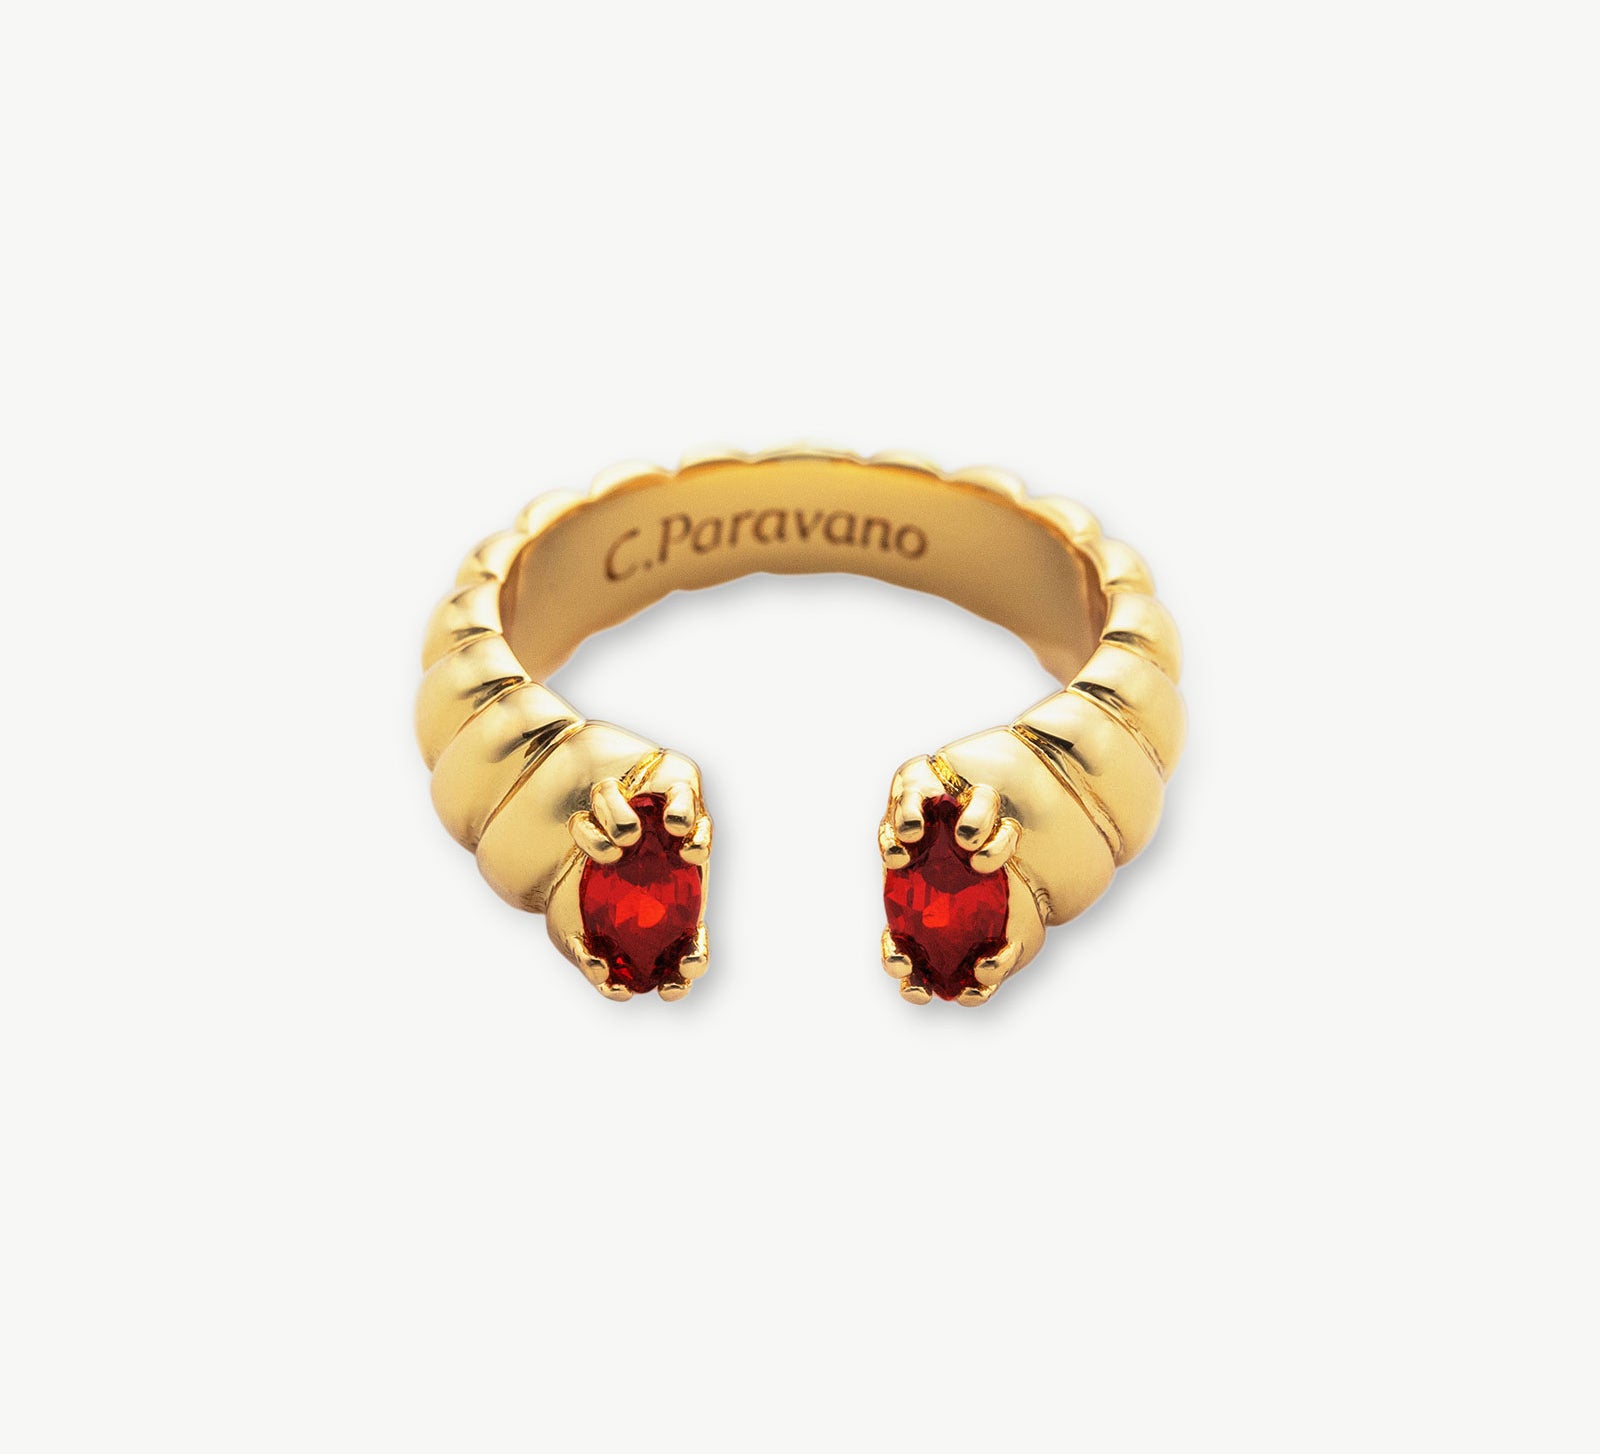 Passionate Ruby Hue: Gemstone Open Ring with a vibrant red pearl, adding a touch of passion and glamour to your ensemble.